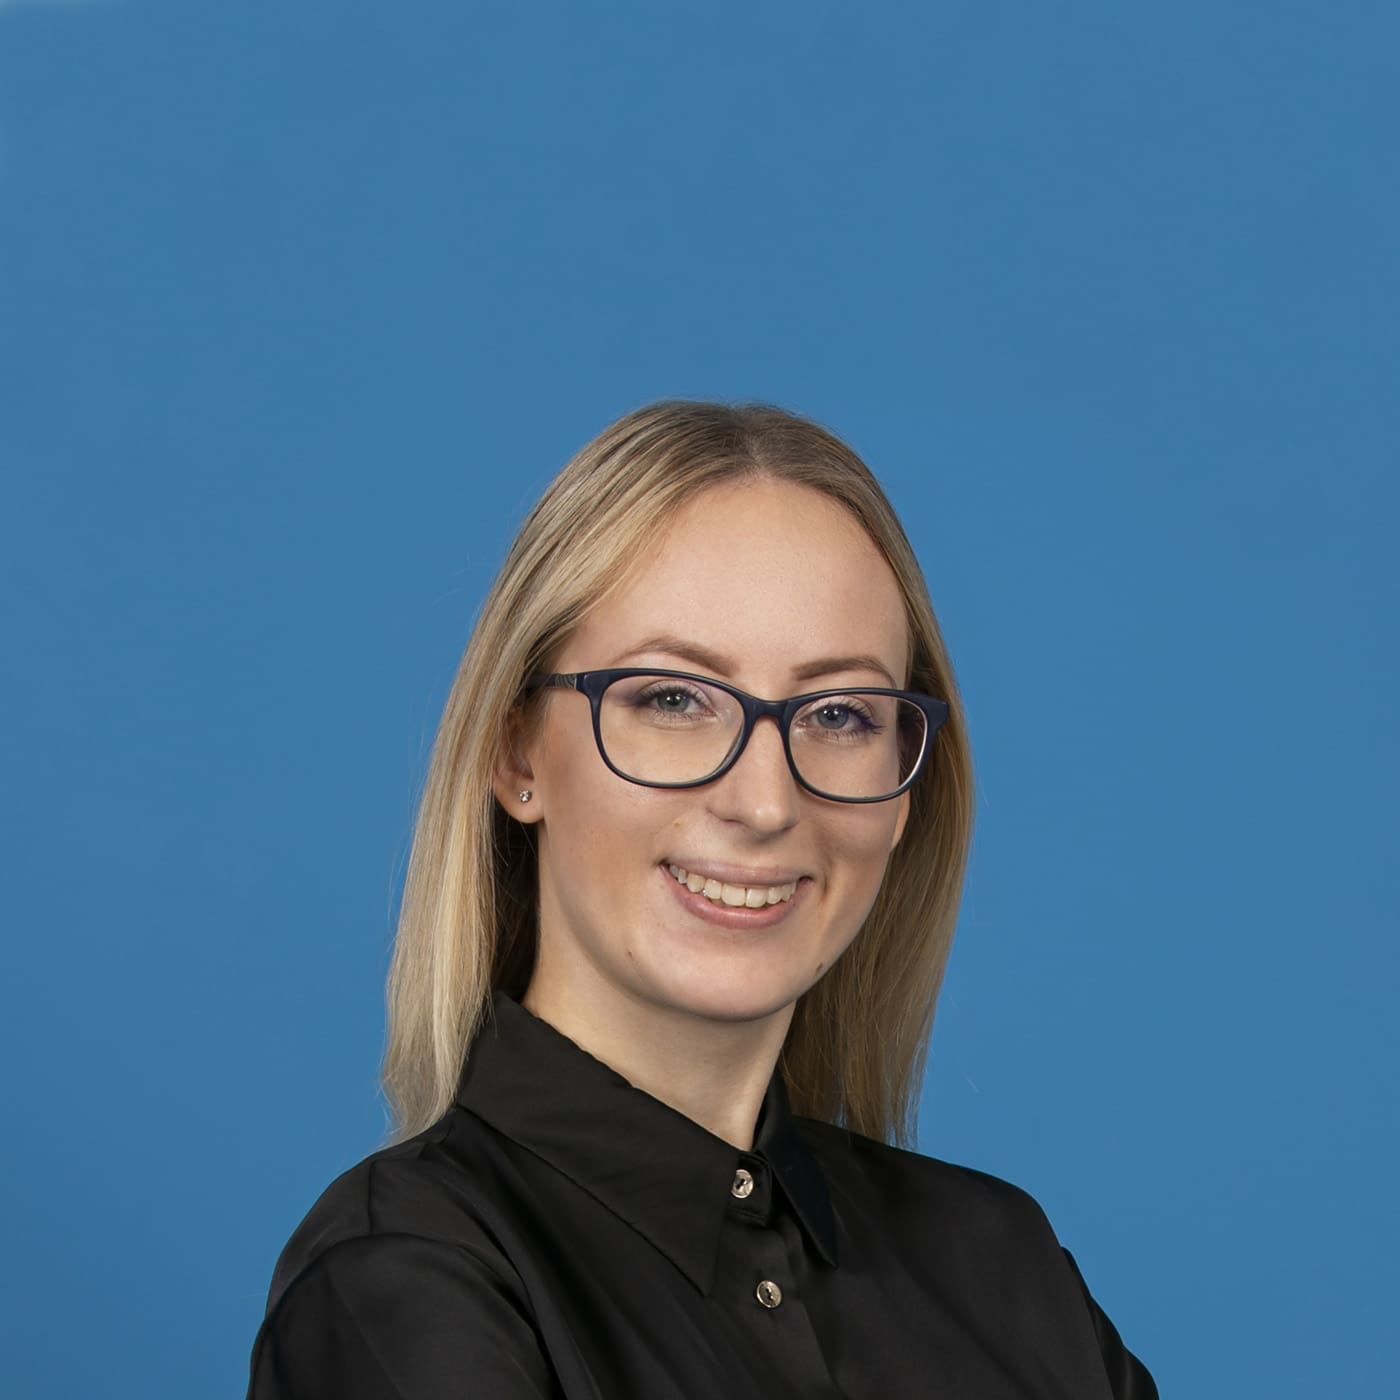 Young blonde woman wearing glasses and smiling into the camera in front of blue background.